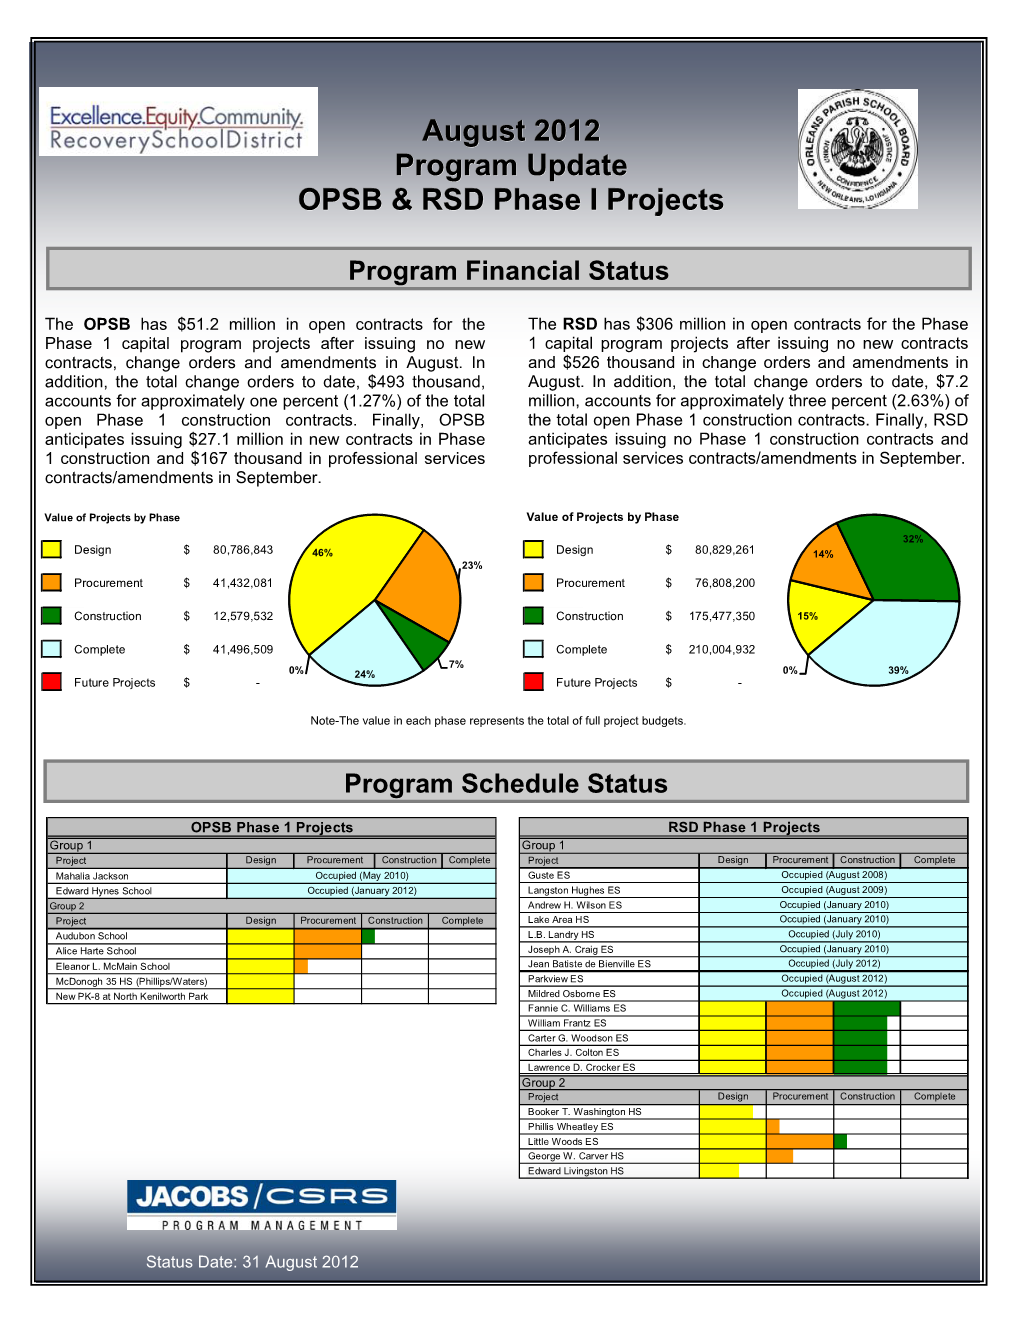 August 2012 Program Update OPSB & RSD Phase I Projects